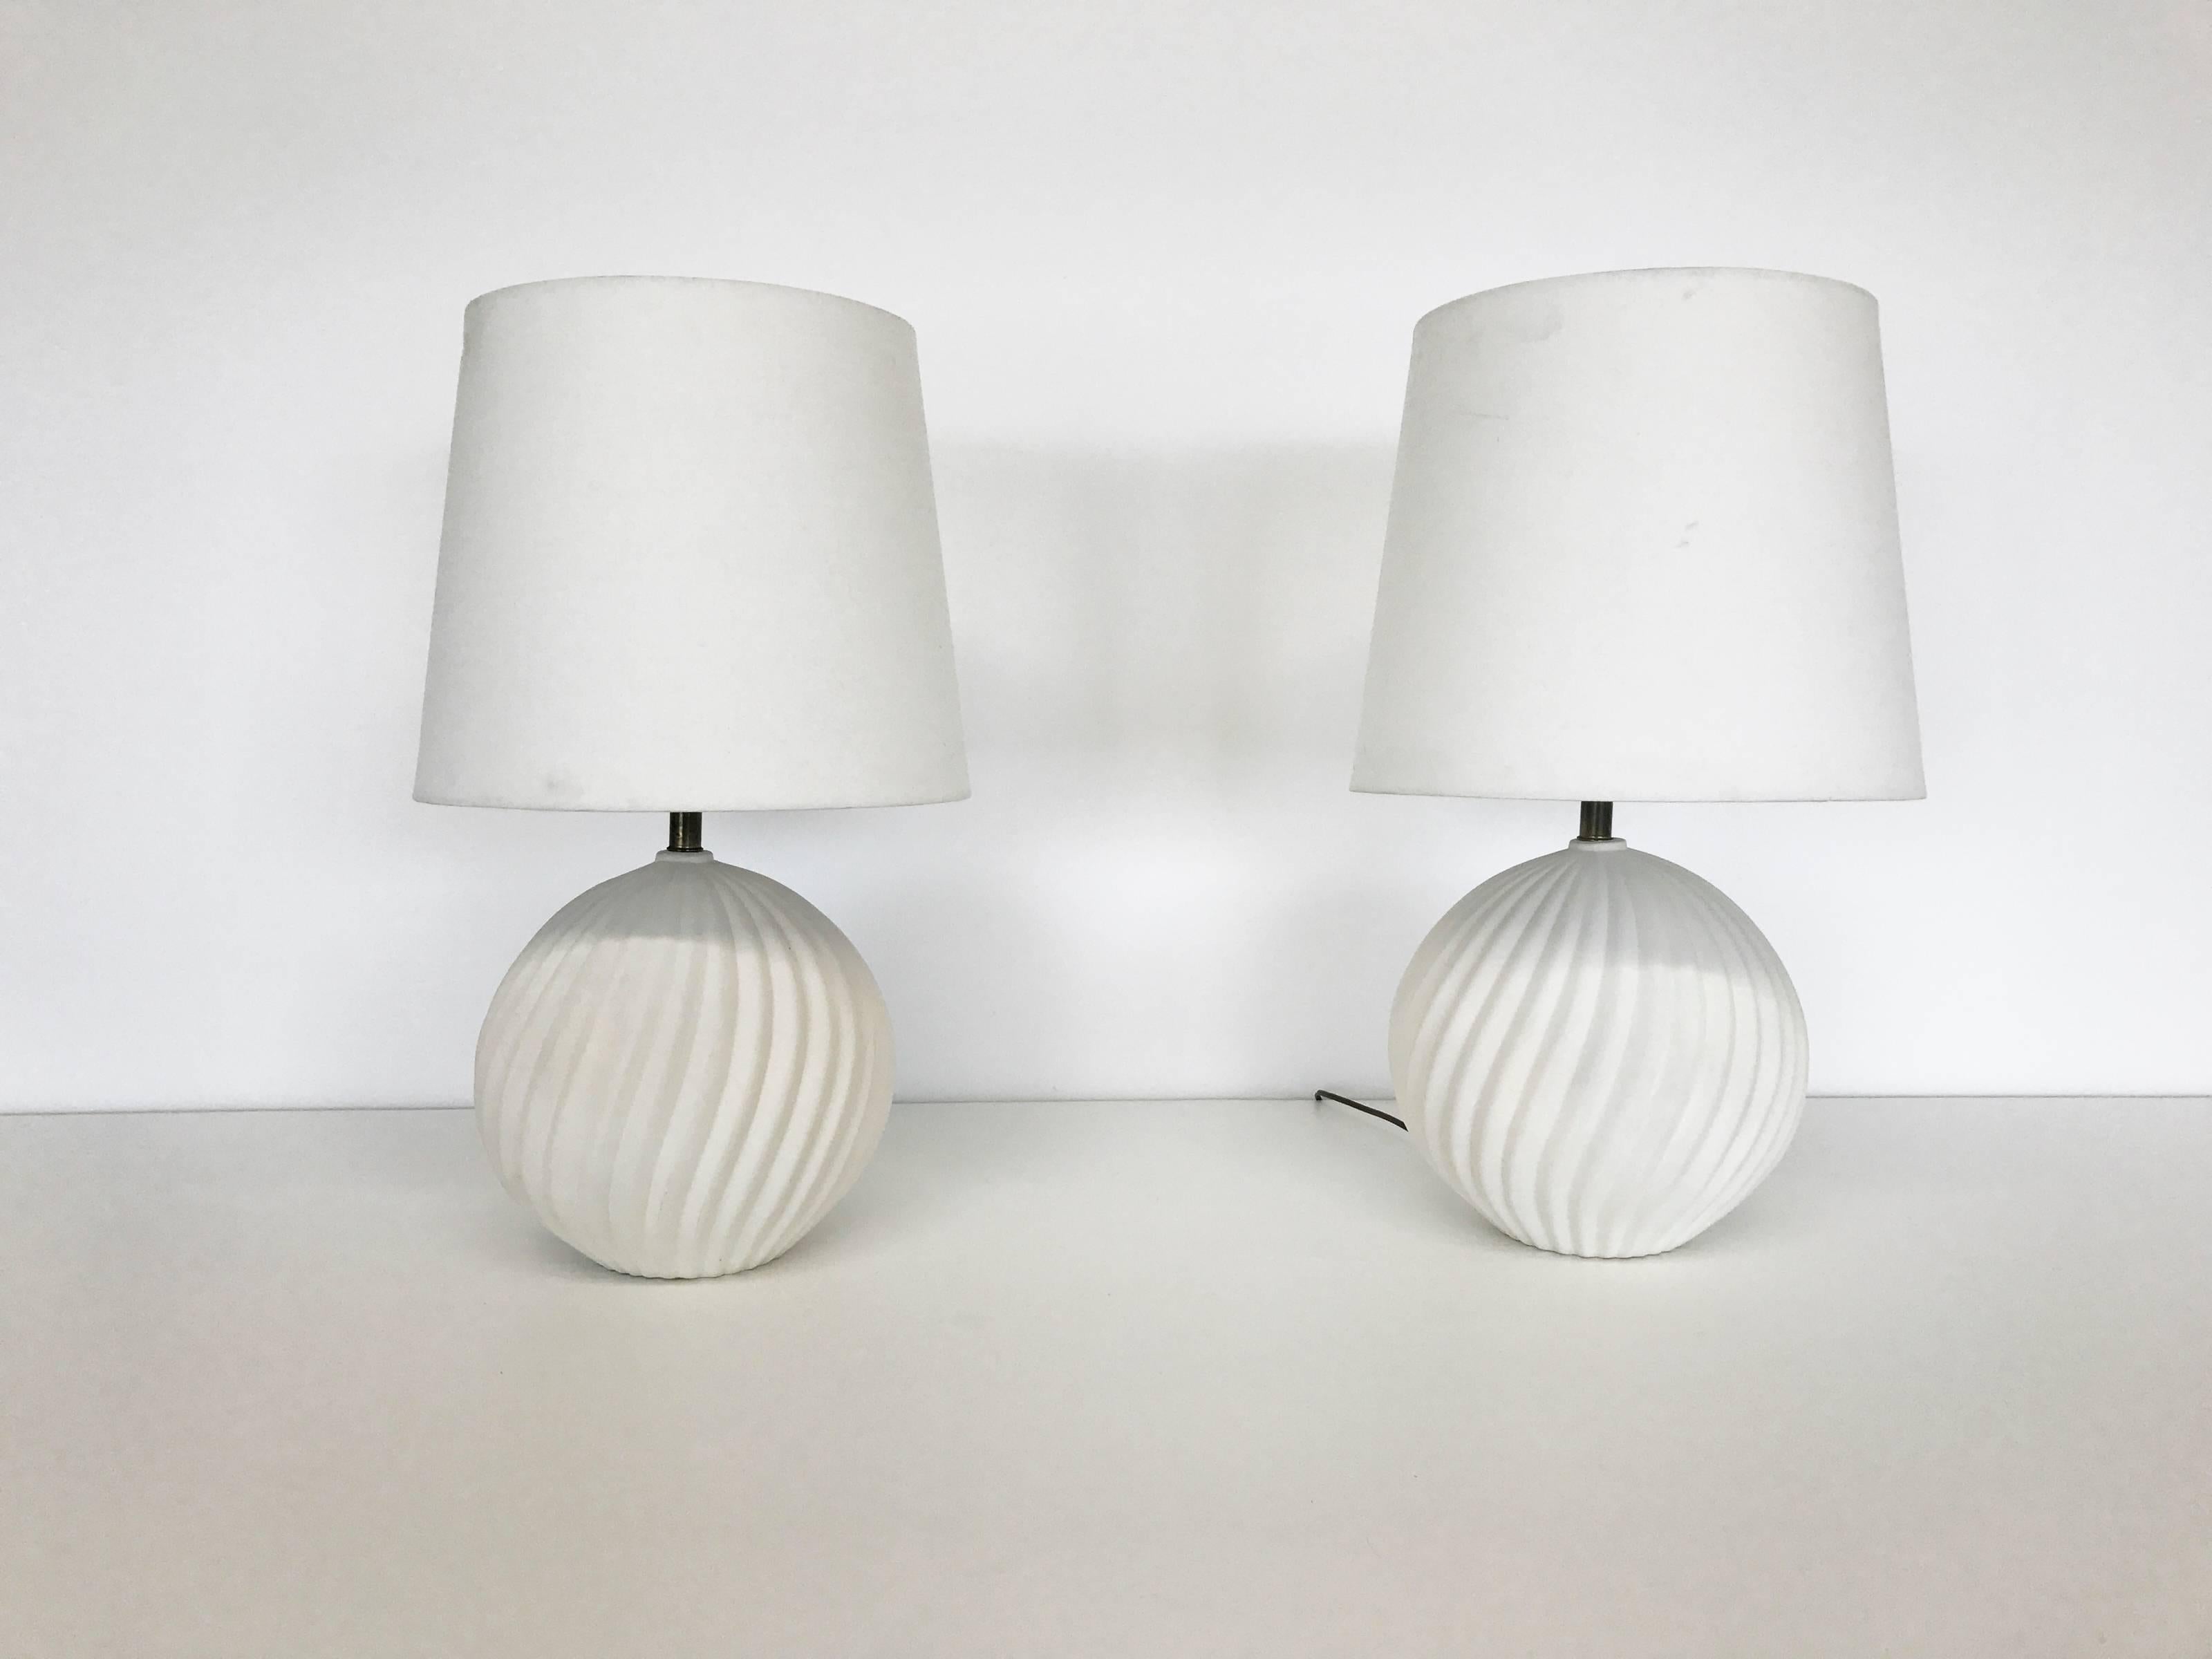 Pair of spherical ceramic lamps with twisted fluting. Lamp bodies are comprised of cream-colored unglazed ceramic with a matte finish. Brass neck and fittings. 

Lamps measure 16 in. high to top of bulb fitting and 12 in. diameter. Harps and